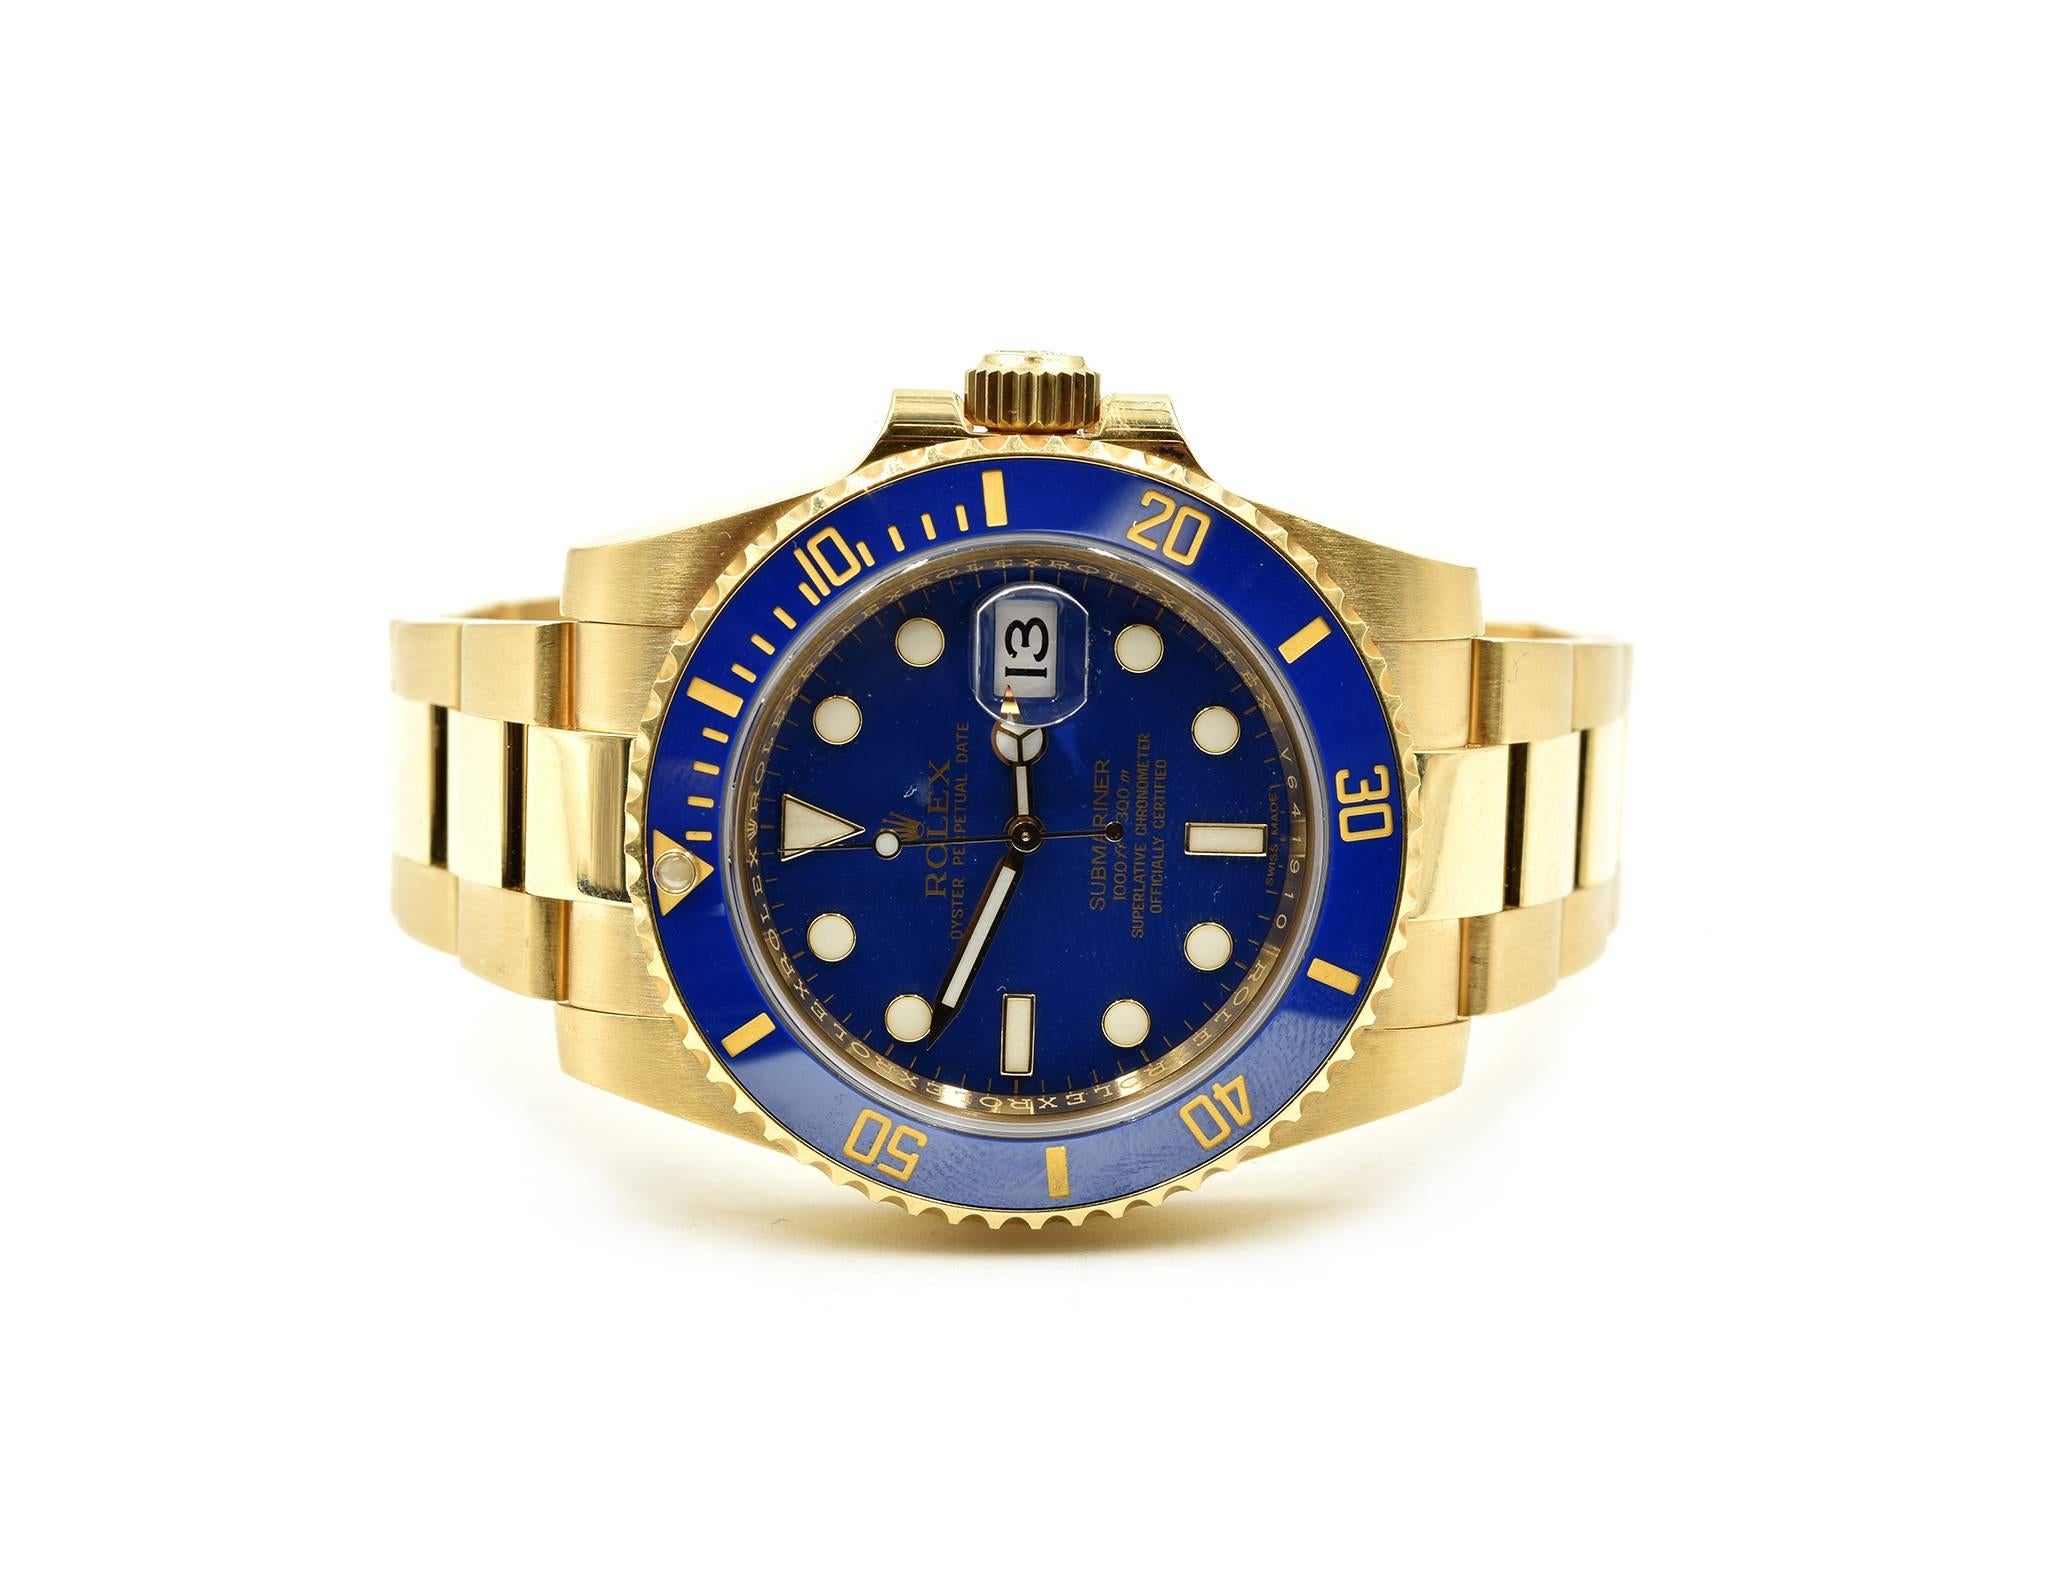 Rolex Yellow Gold Blue Ceramic Submariner automatic Wristwatch Ref 116618LB In Excellent Condition In Scottsdale, AZ